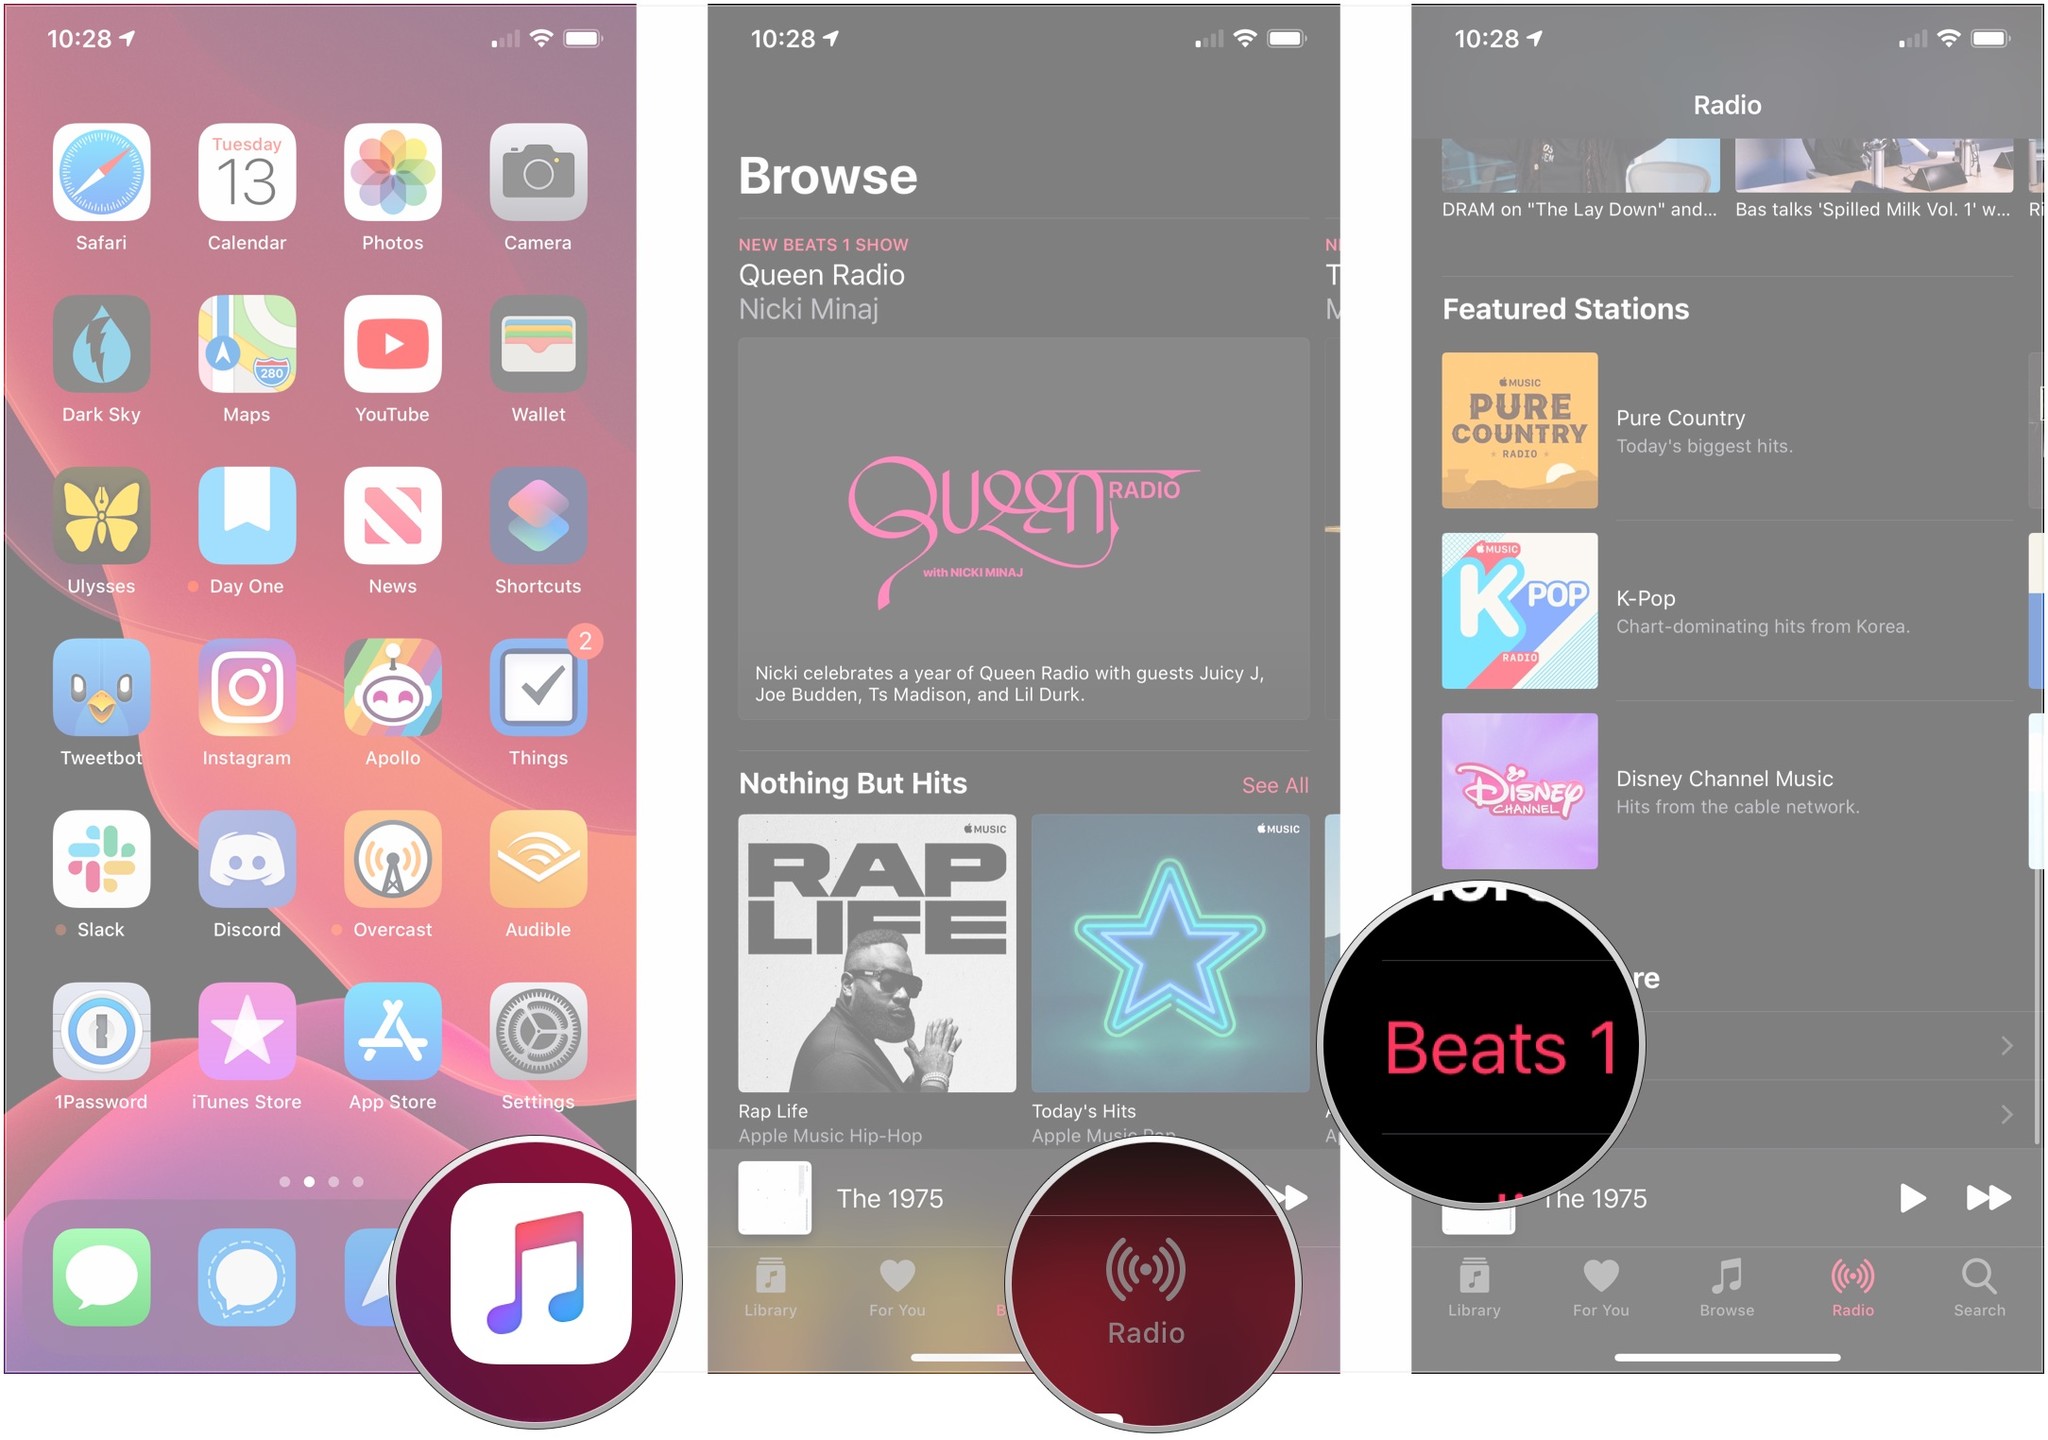 Open Music, tap Radio, tap Beats 1 Shows